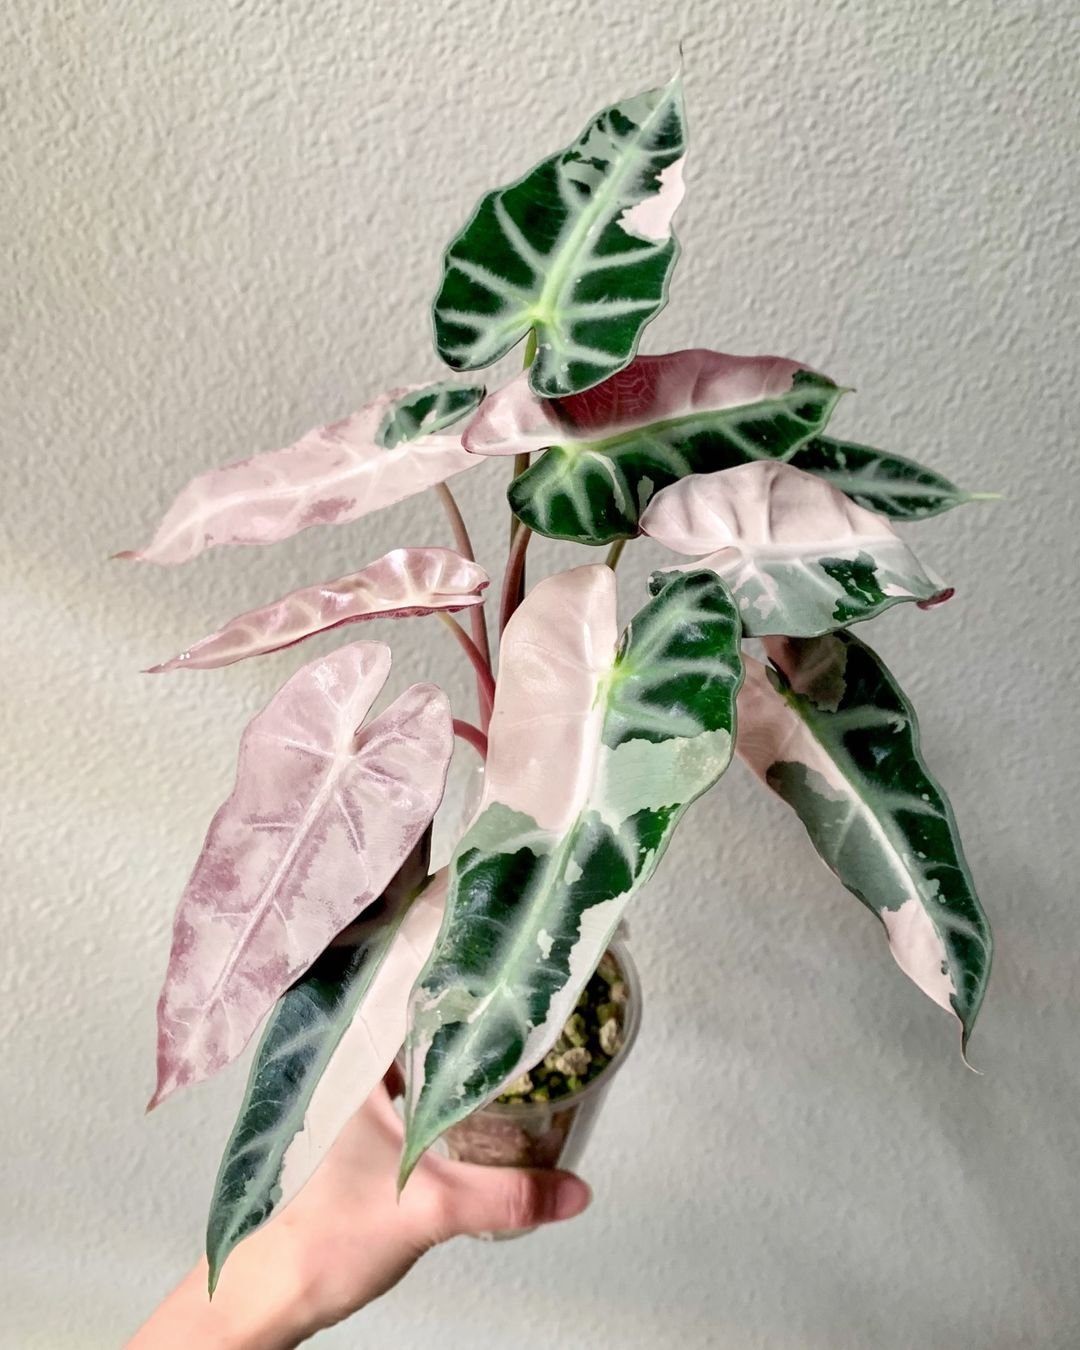 Alocasia Amazonica Bambino plant held by someone, displaying pink and green leaves.